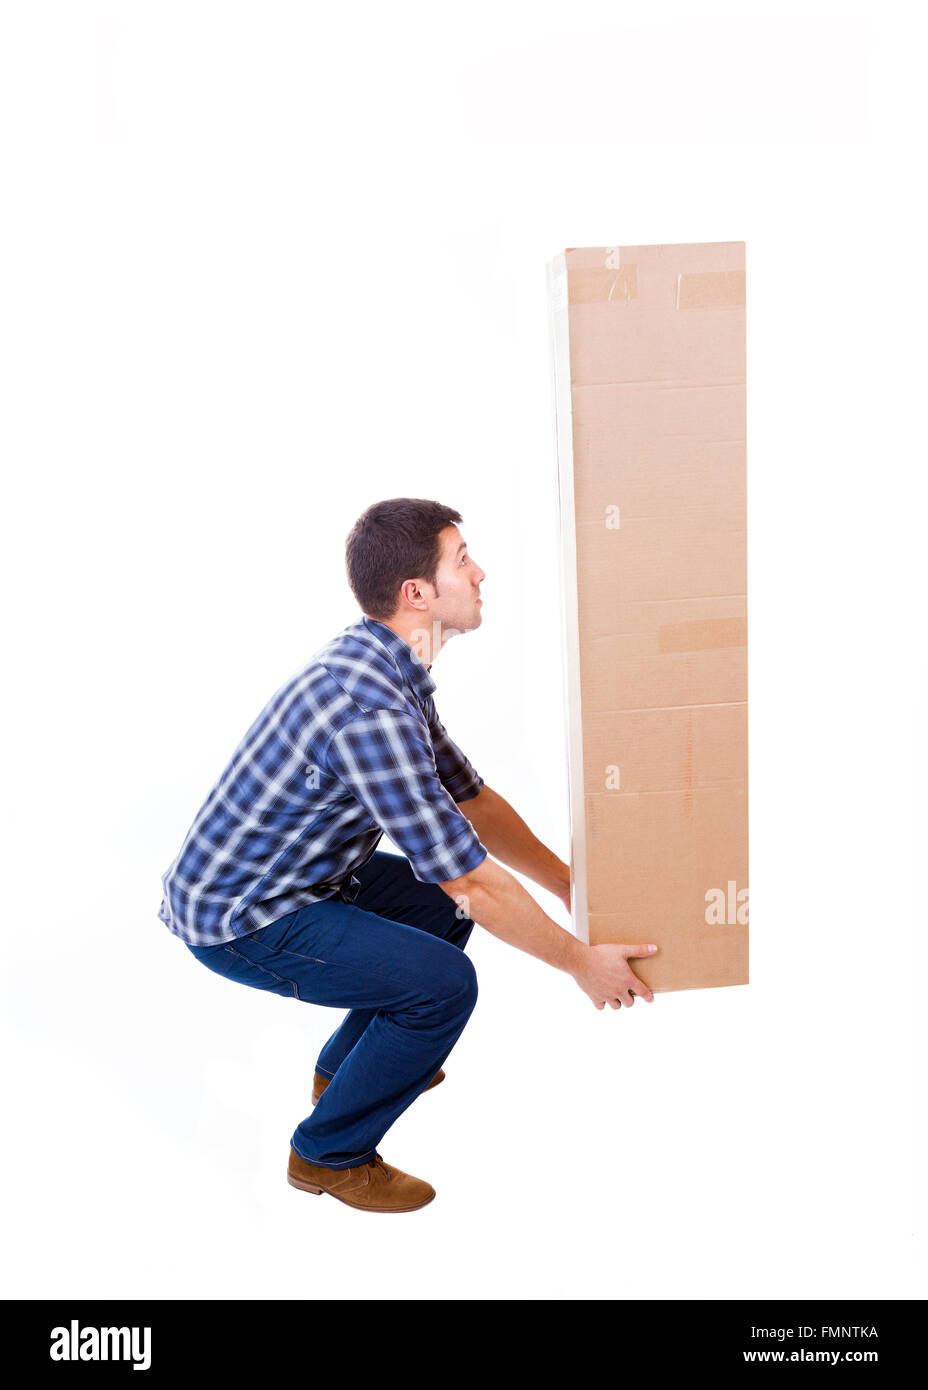 Young man lifting a cardboard box, isolated on white background Stock Photo